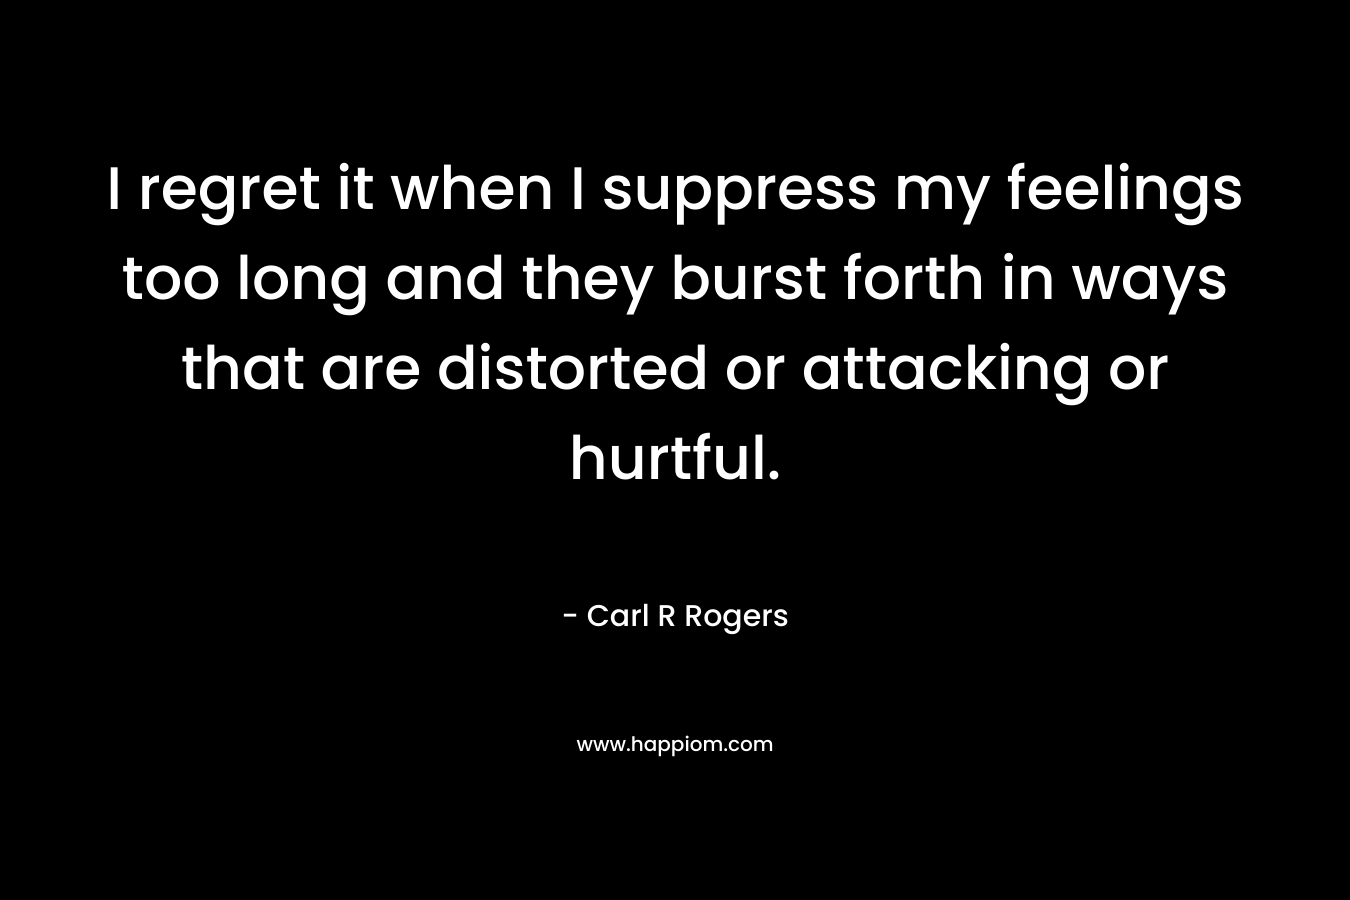 I regret it when I suppress my feelings too long and they burst forth in ways that are distorted or attacking or hurtful. – Carl R Rogers